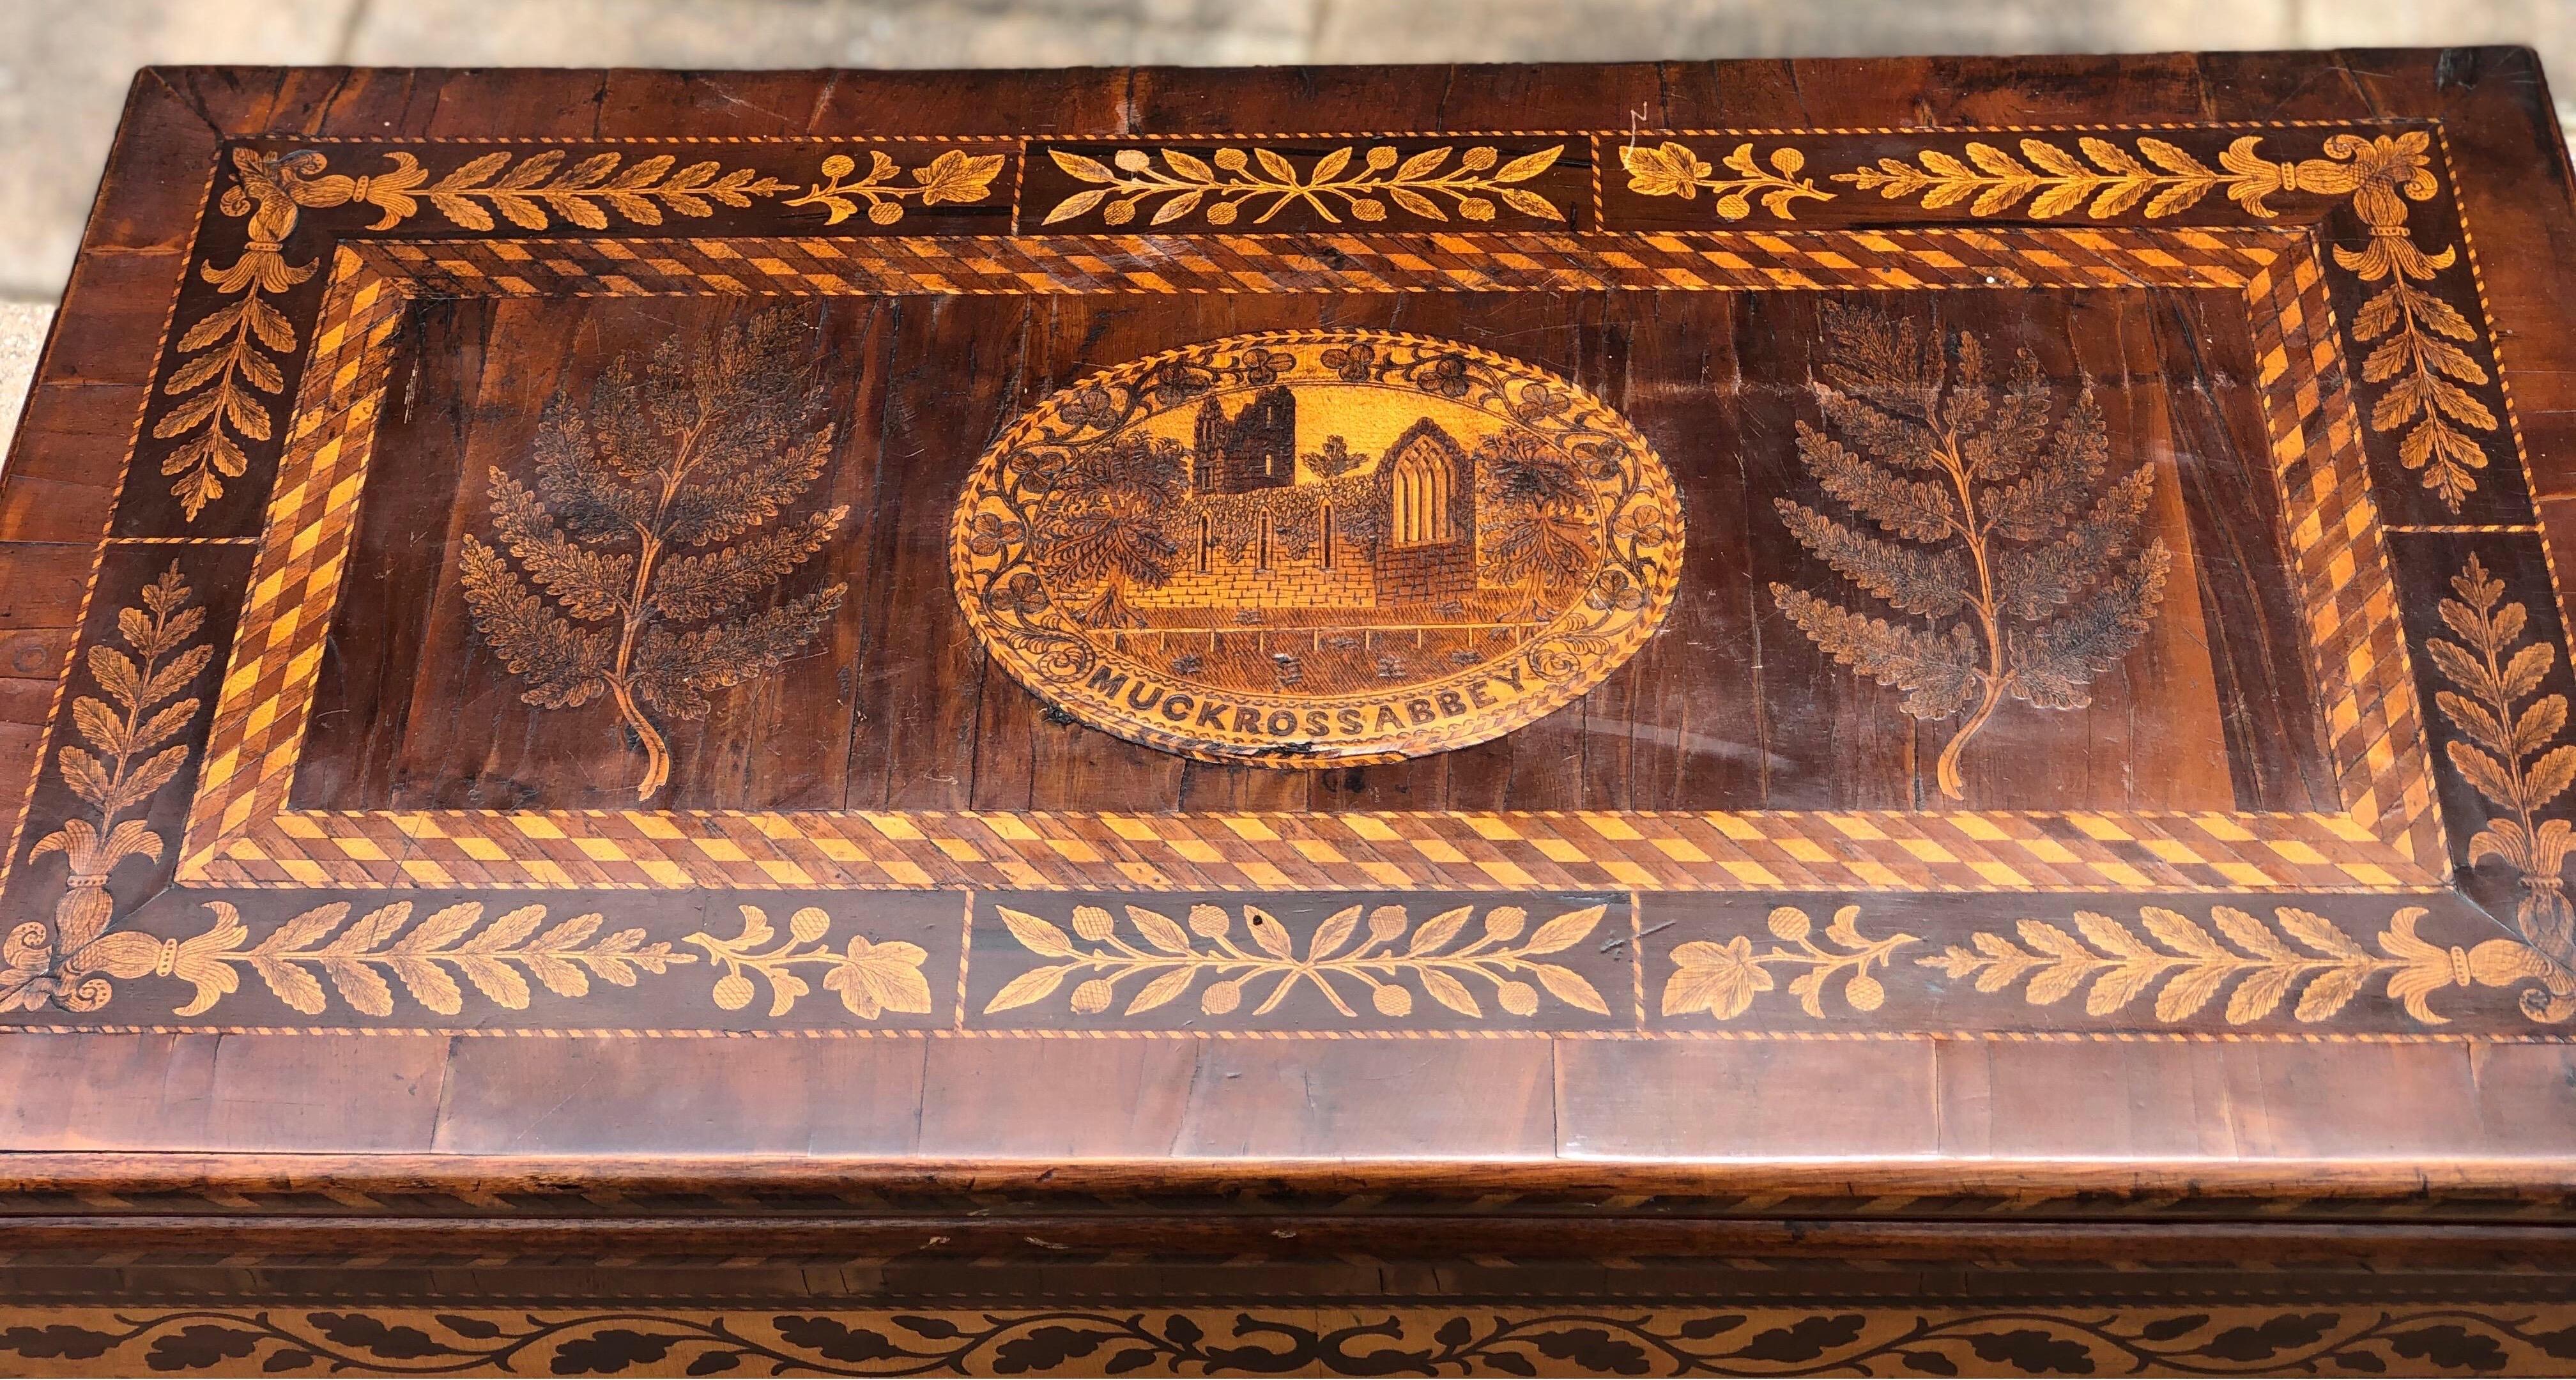 19th century Killarney games table with depictions of Muckross Abbey, shamrocks, ferns and acorns throughout. 

The furniture from this part of Ireland is very distinctive with inlaid scenes and symbols of Ireland. The top has a scene of Muckross